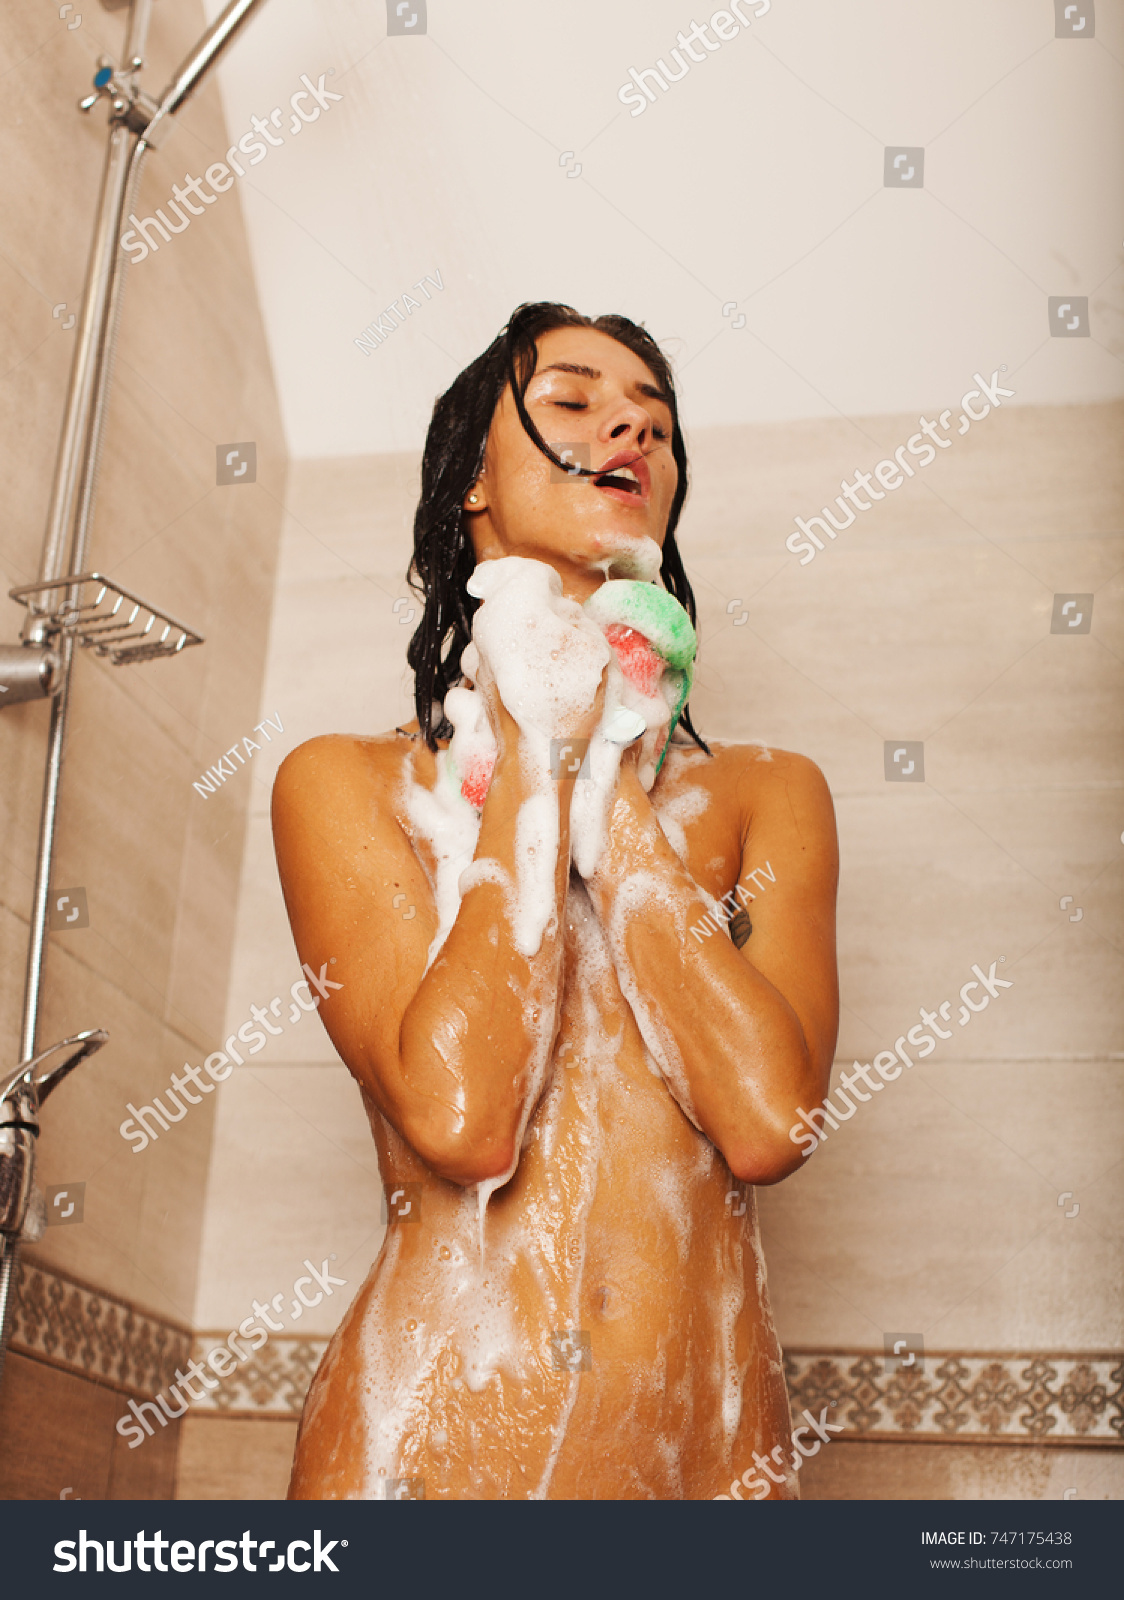 Sexy Naked Woman Shower Bathes Shower